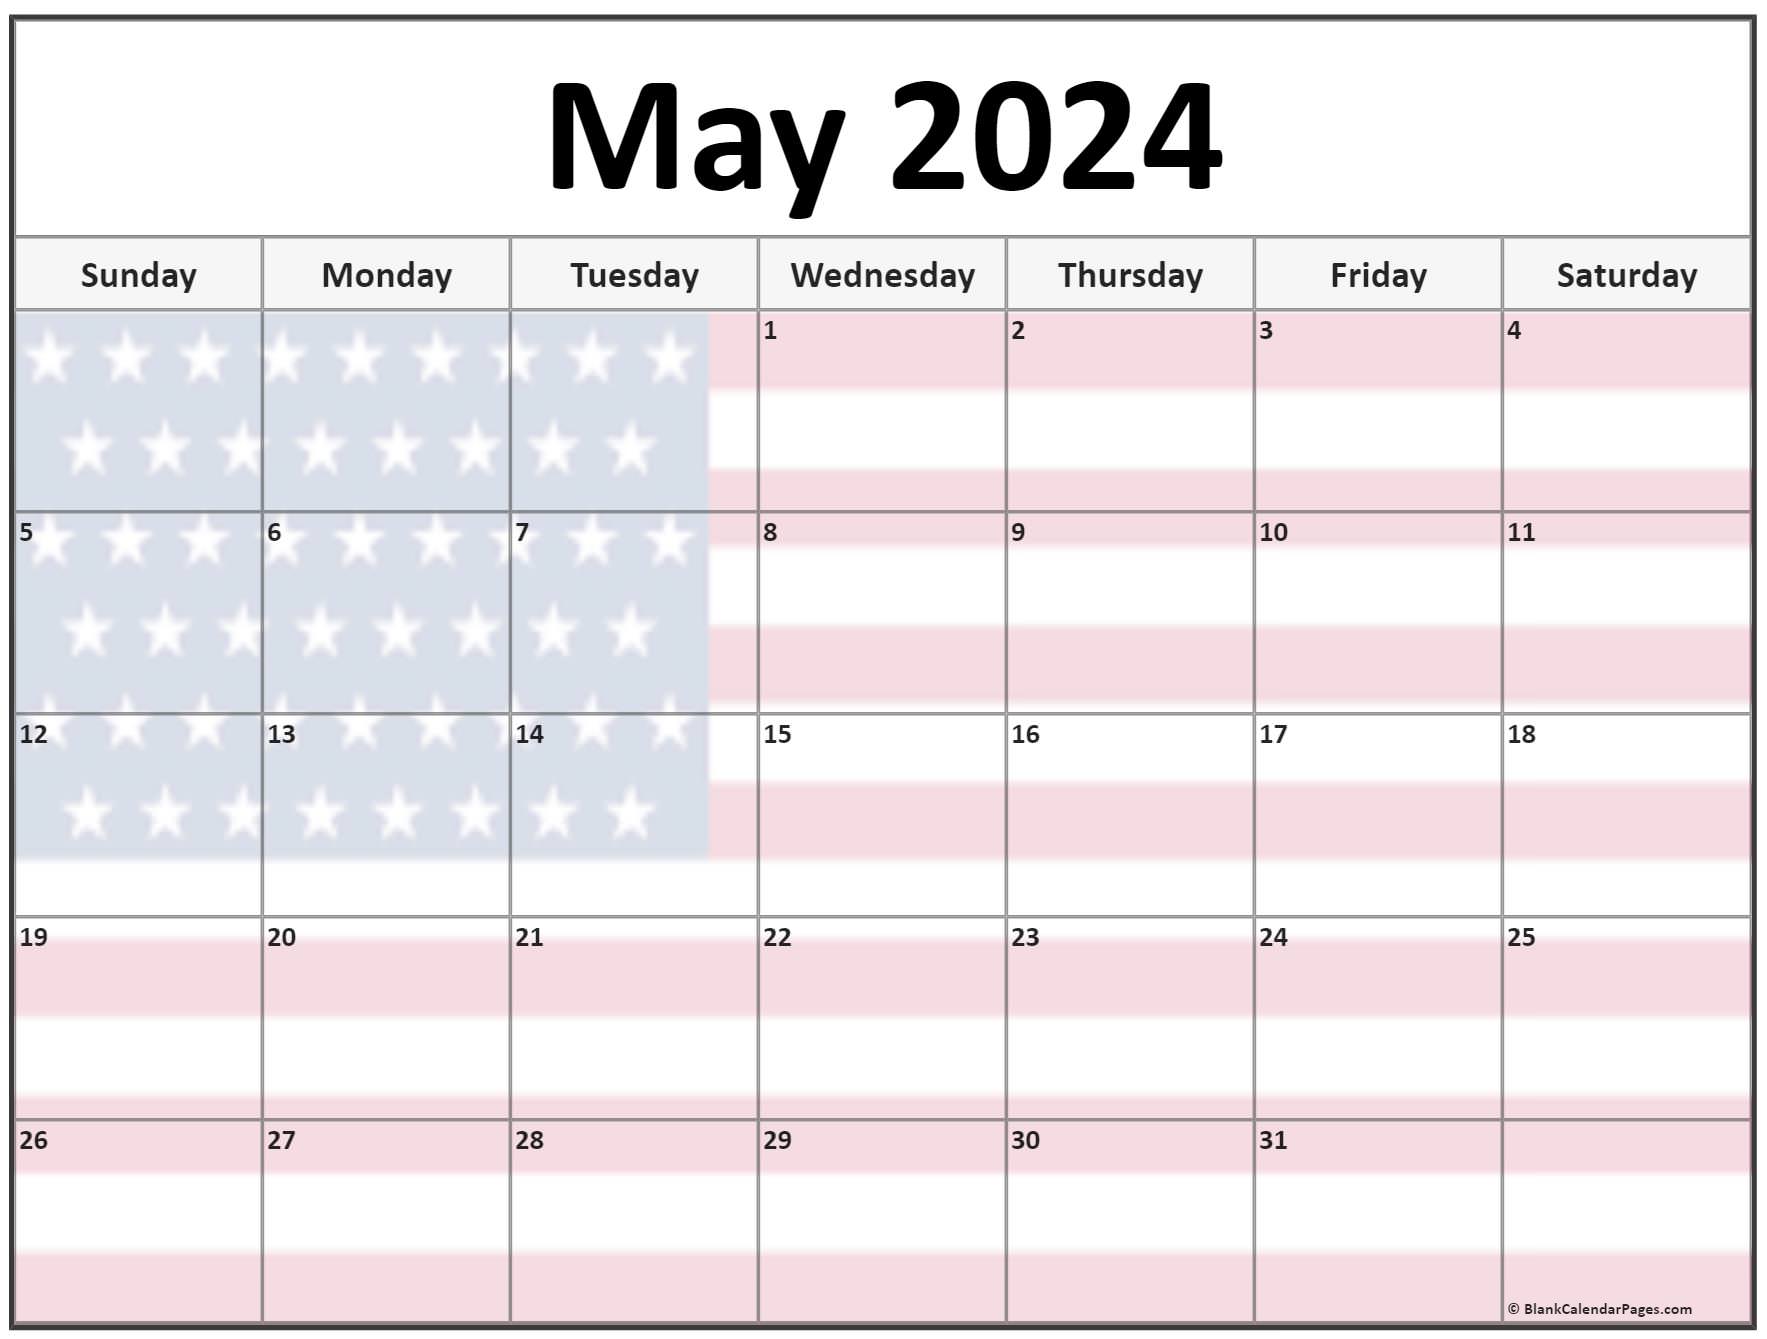 Collection of May 2024 photo calendars with image filters.